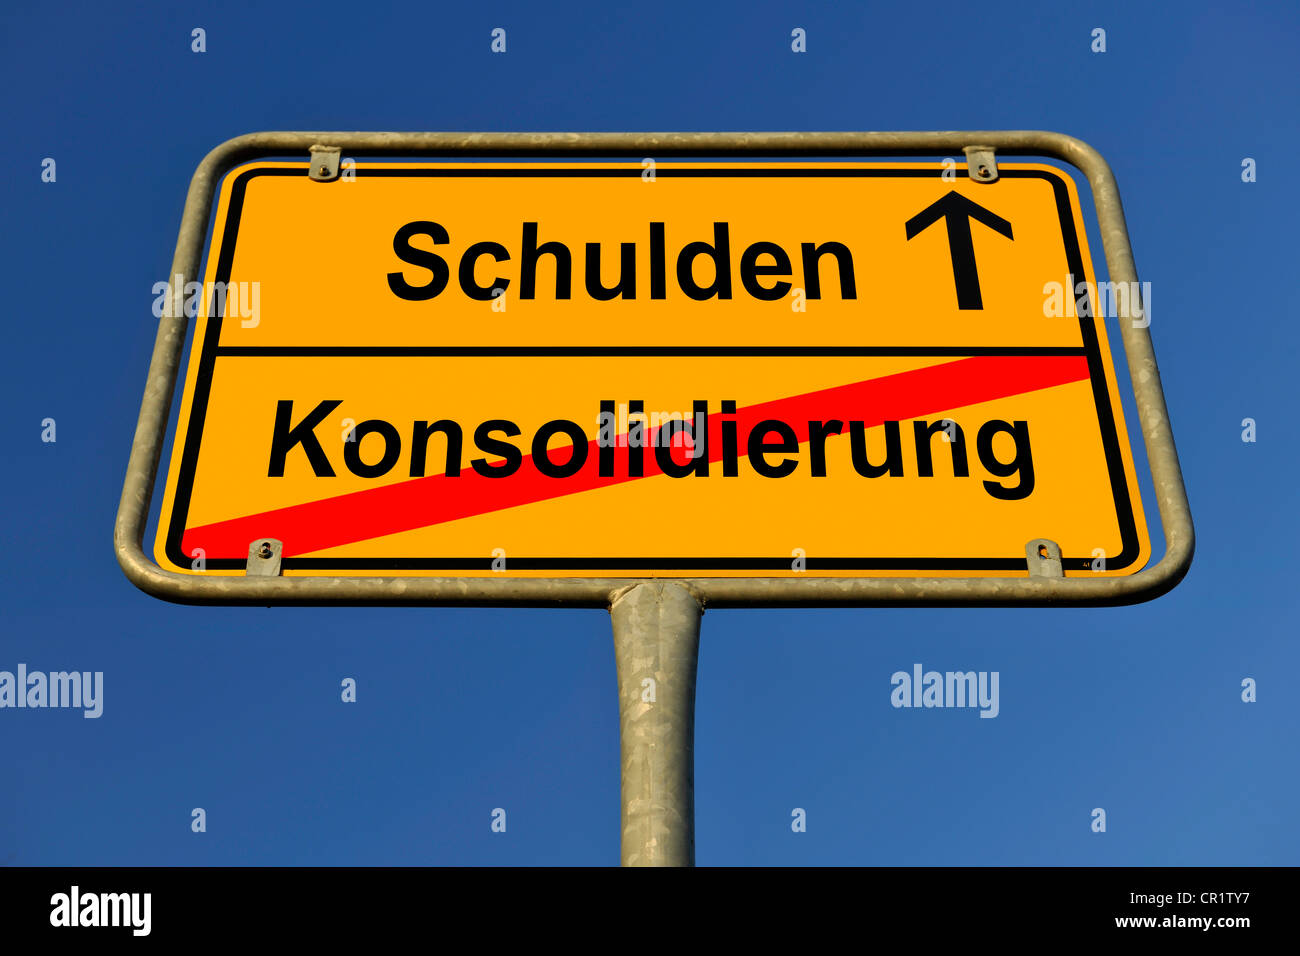 City limit sign, symbolic image for the way from a Konsolidierung to Schulden, German for going from a consolidation to having Stock Photo